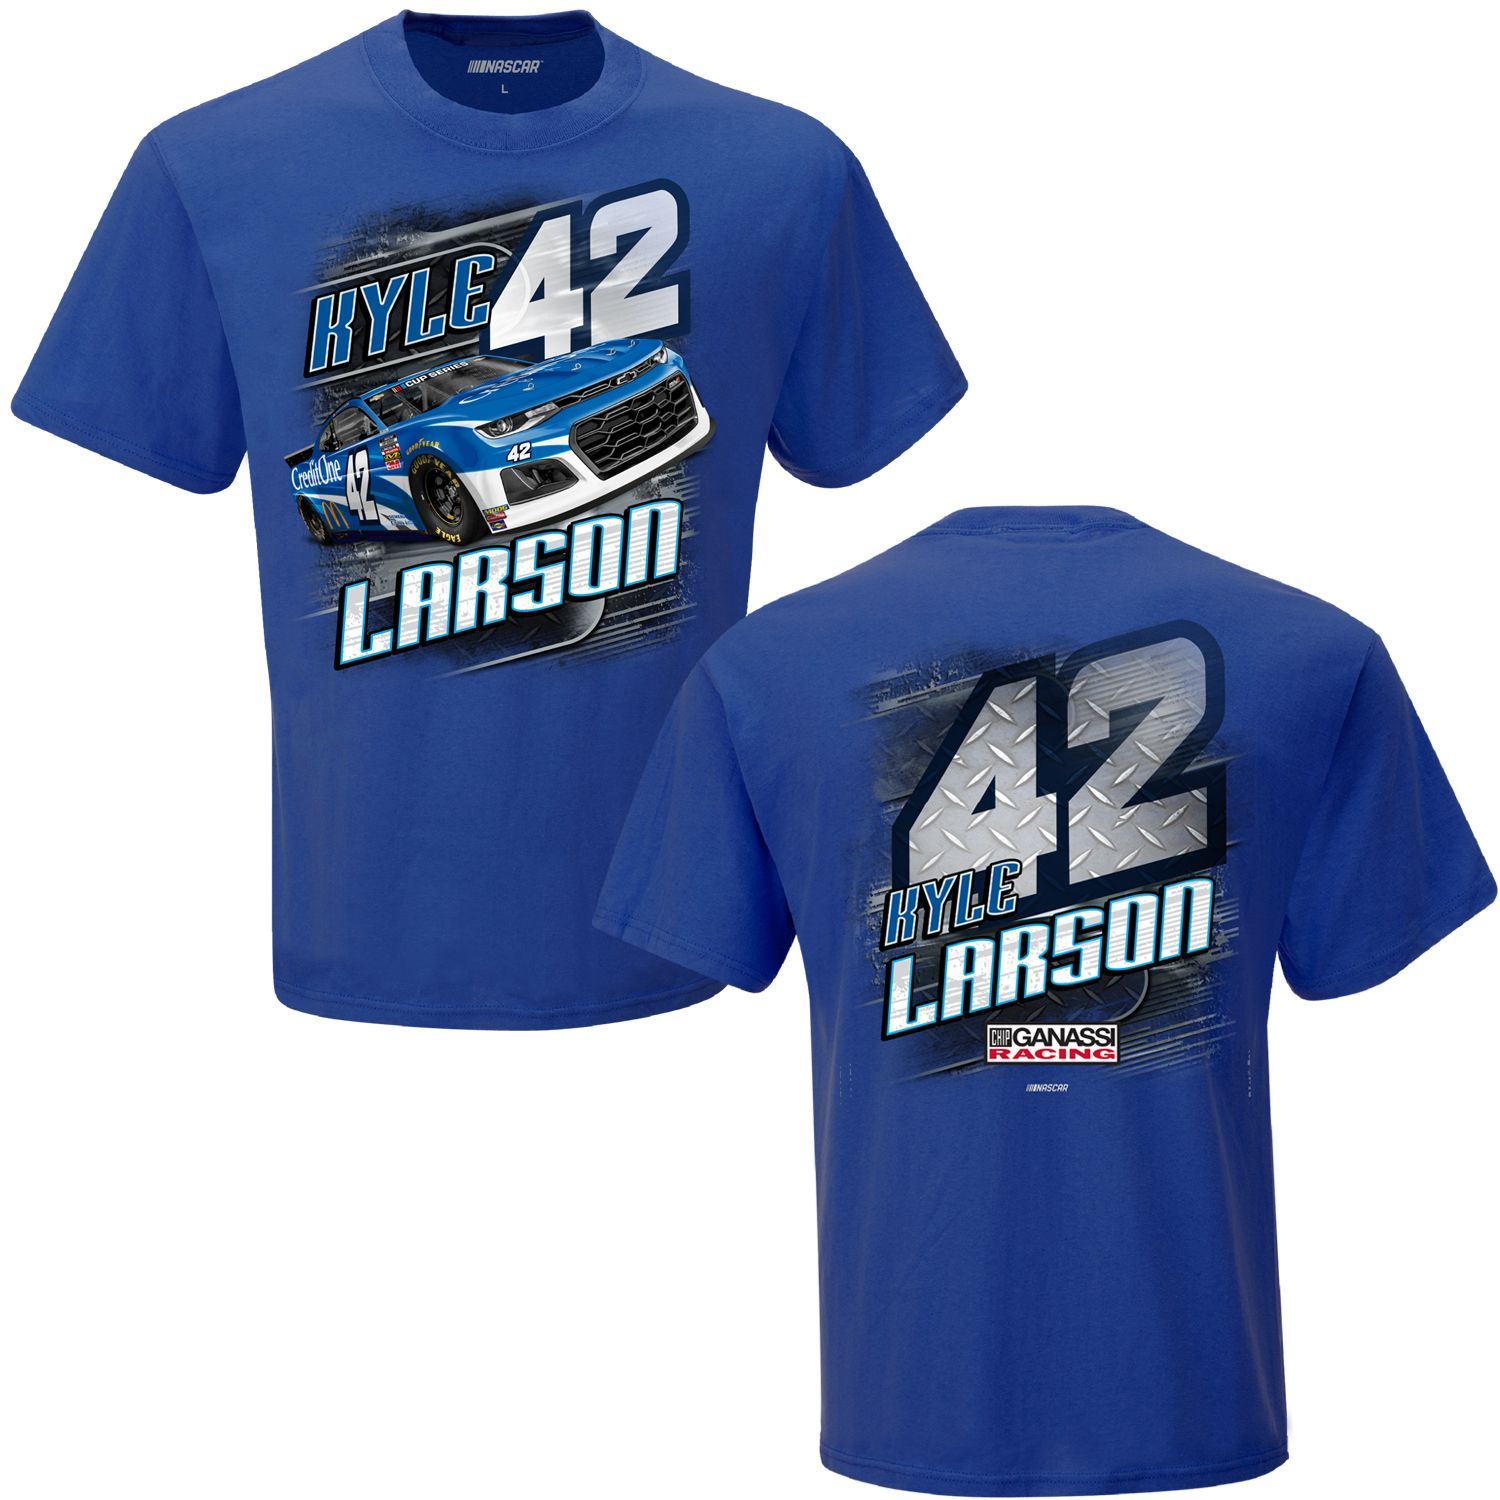 2020 Kyle Larson Credit One Bank "Camber" tee